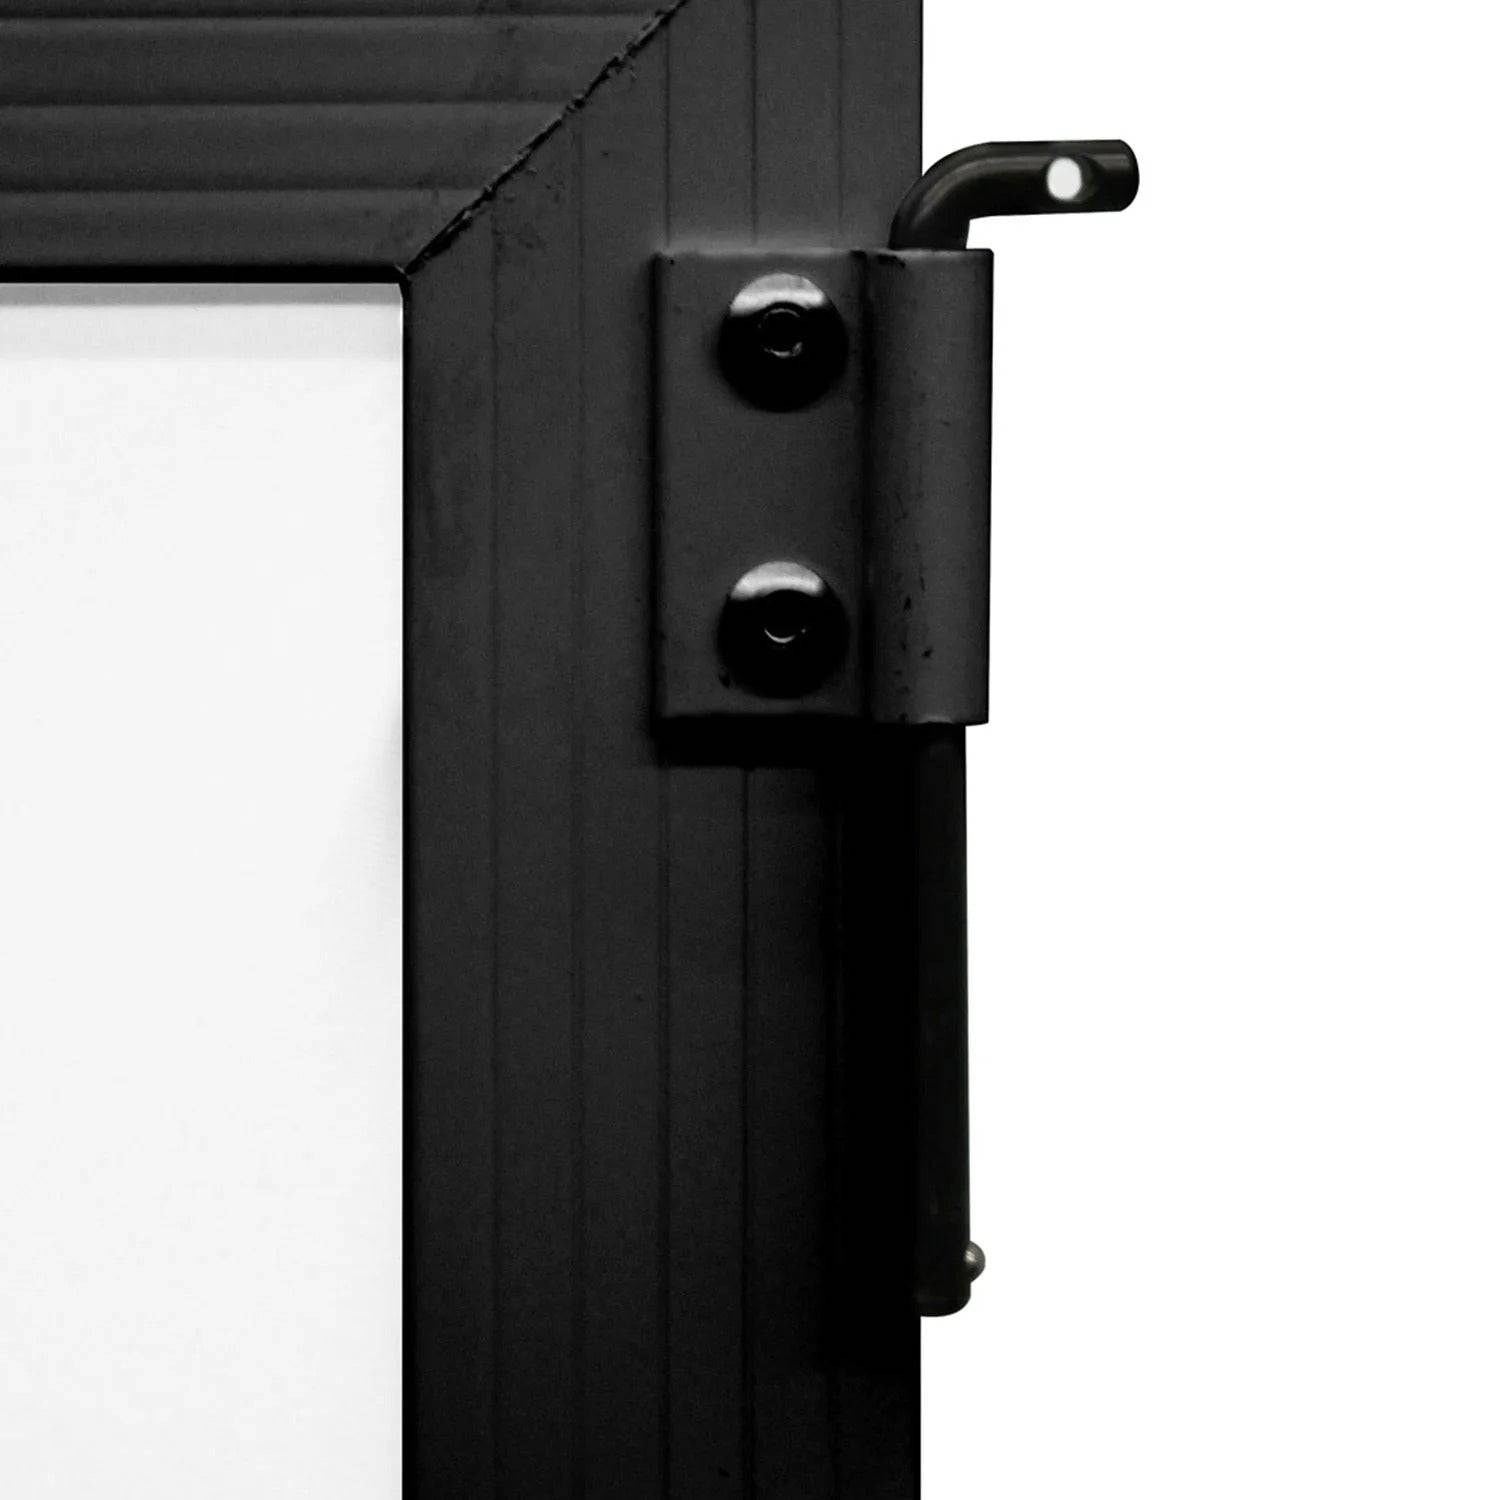 Odyssey SWF4846B-2RP, 48 x 46 Inches Add-on Facade Panel for 46″ Tall Pro DJ Facades with Removable Pin Hinges - Hollywood DJ